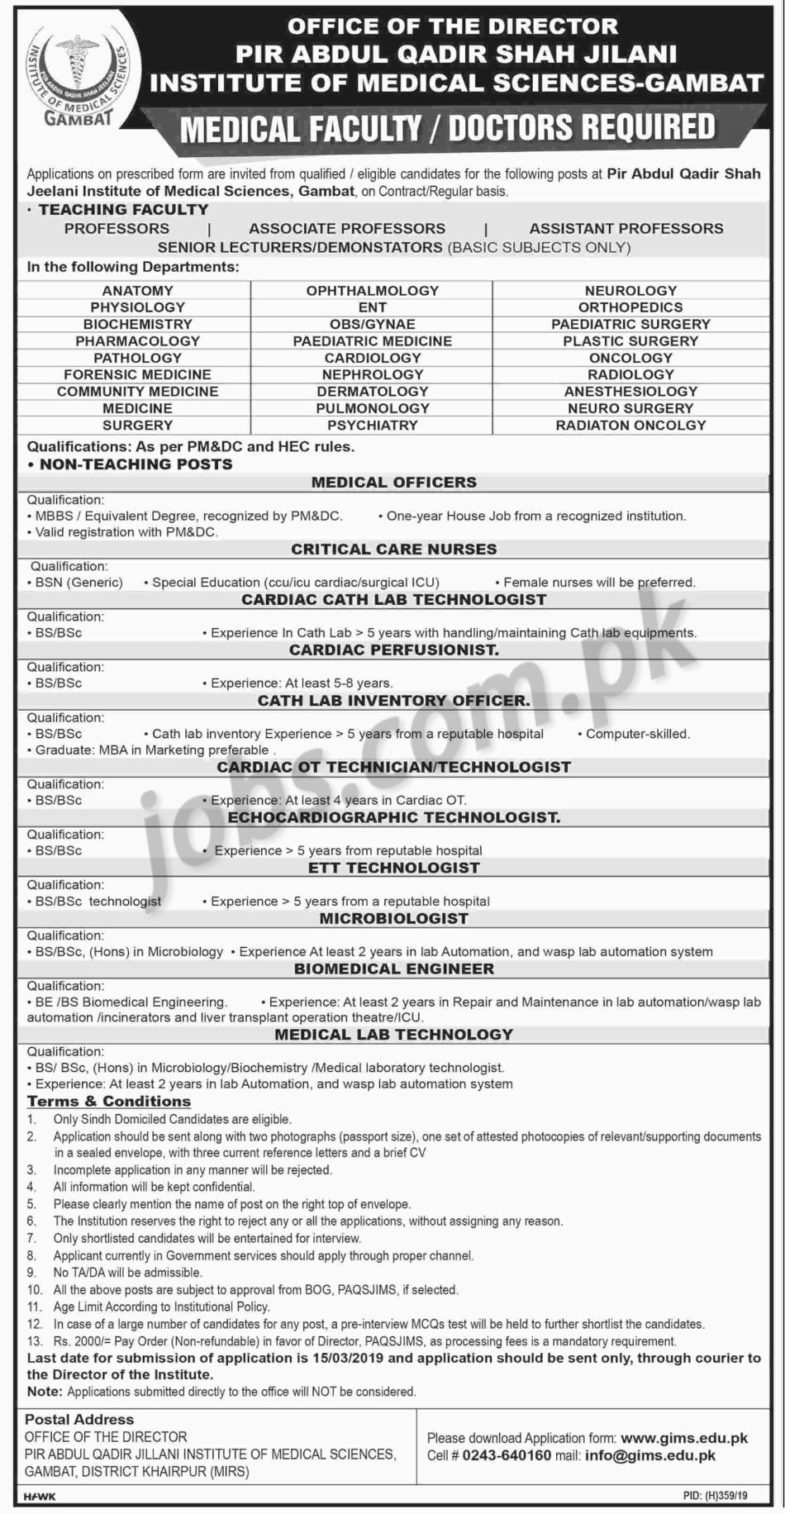 PAQSJ Institute of Medical Sciences Khairpur Jobs 2019 for Medical & Teaching Faculty